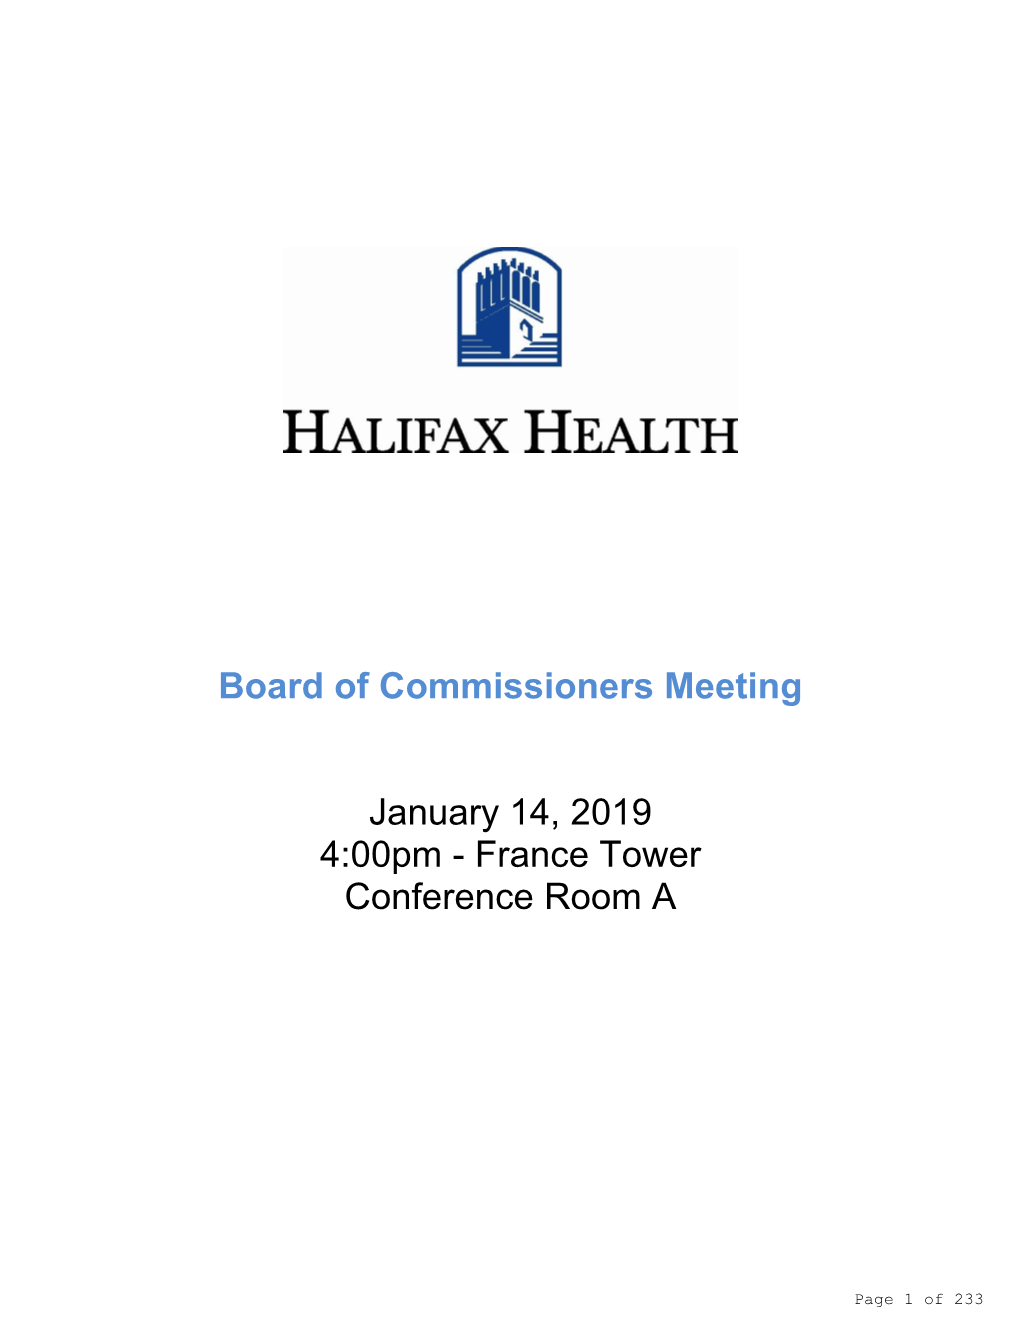 Board of Commissioners Meeting January 14, 2019 4:00Pm